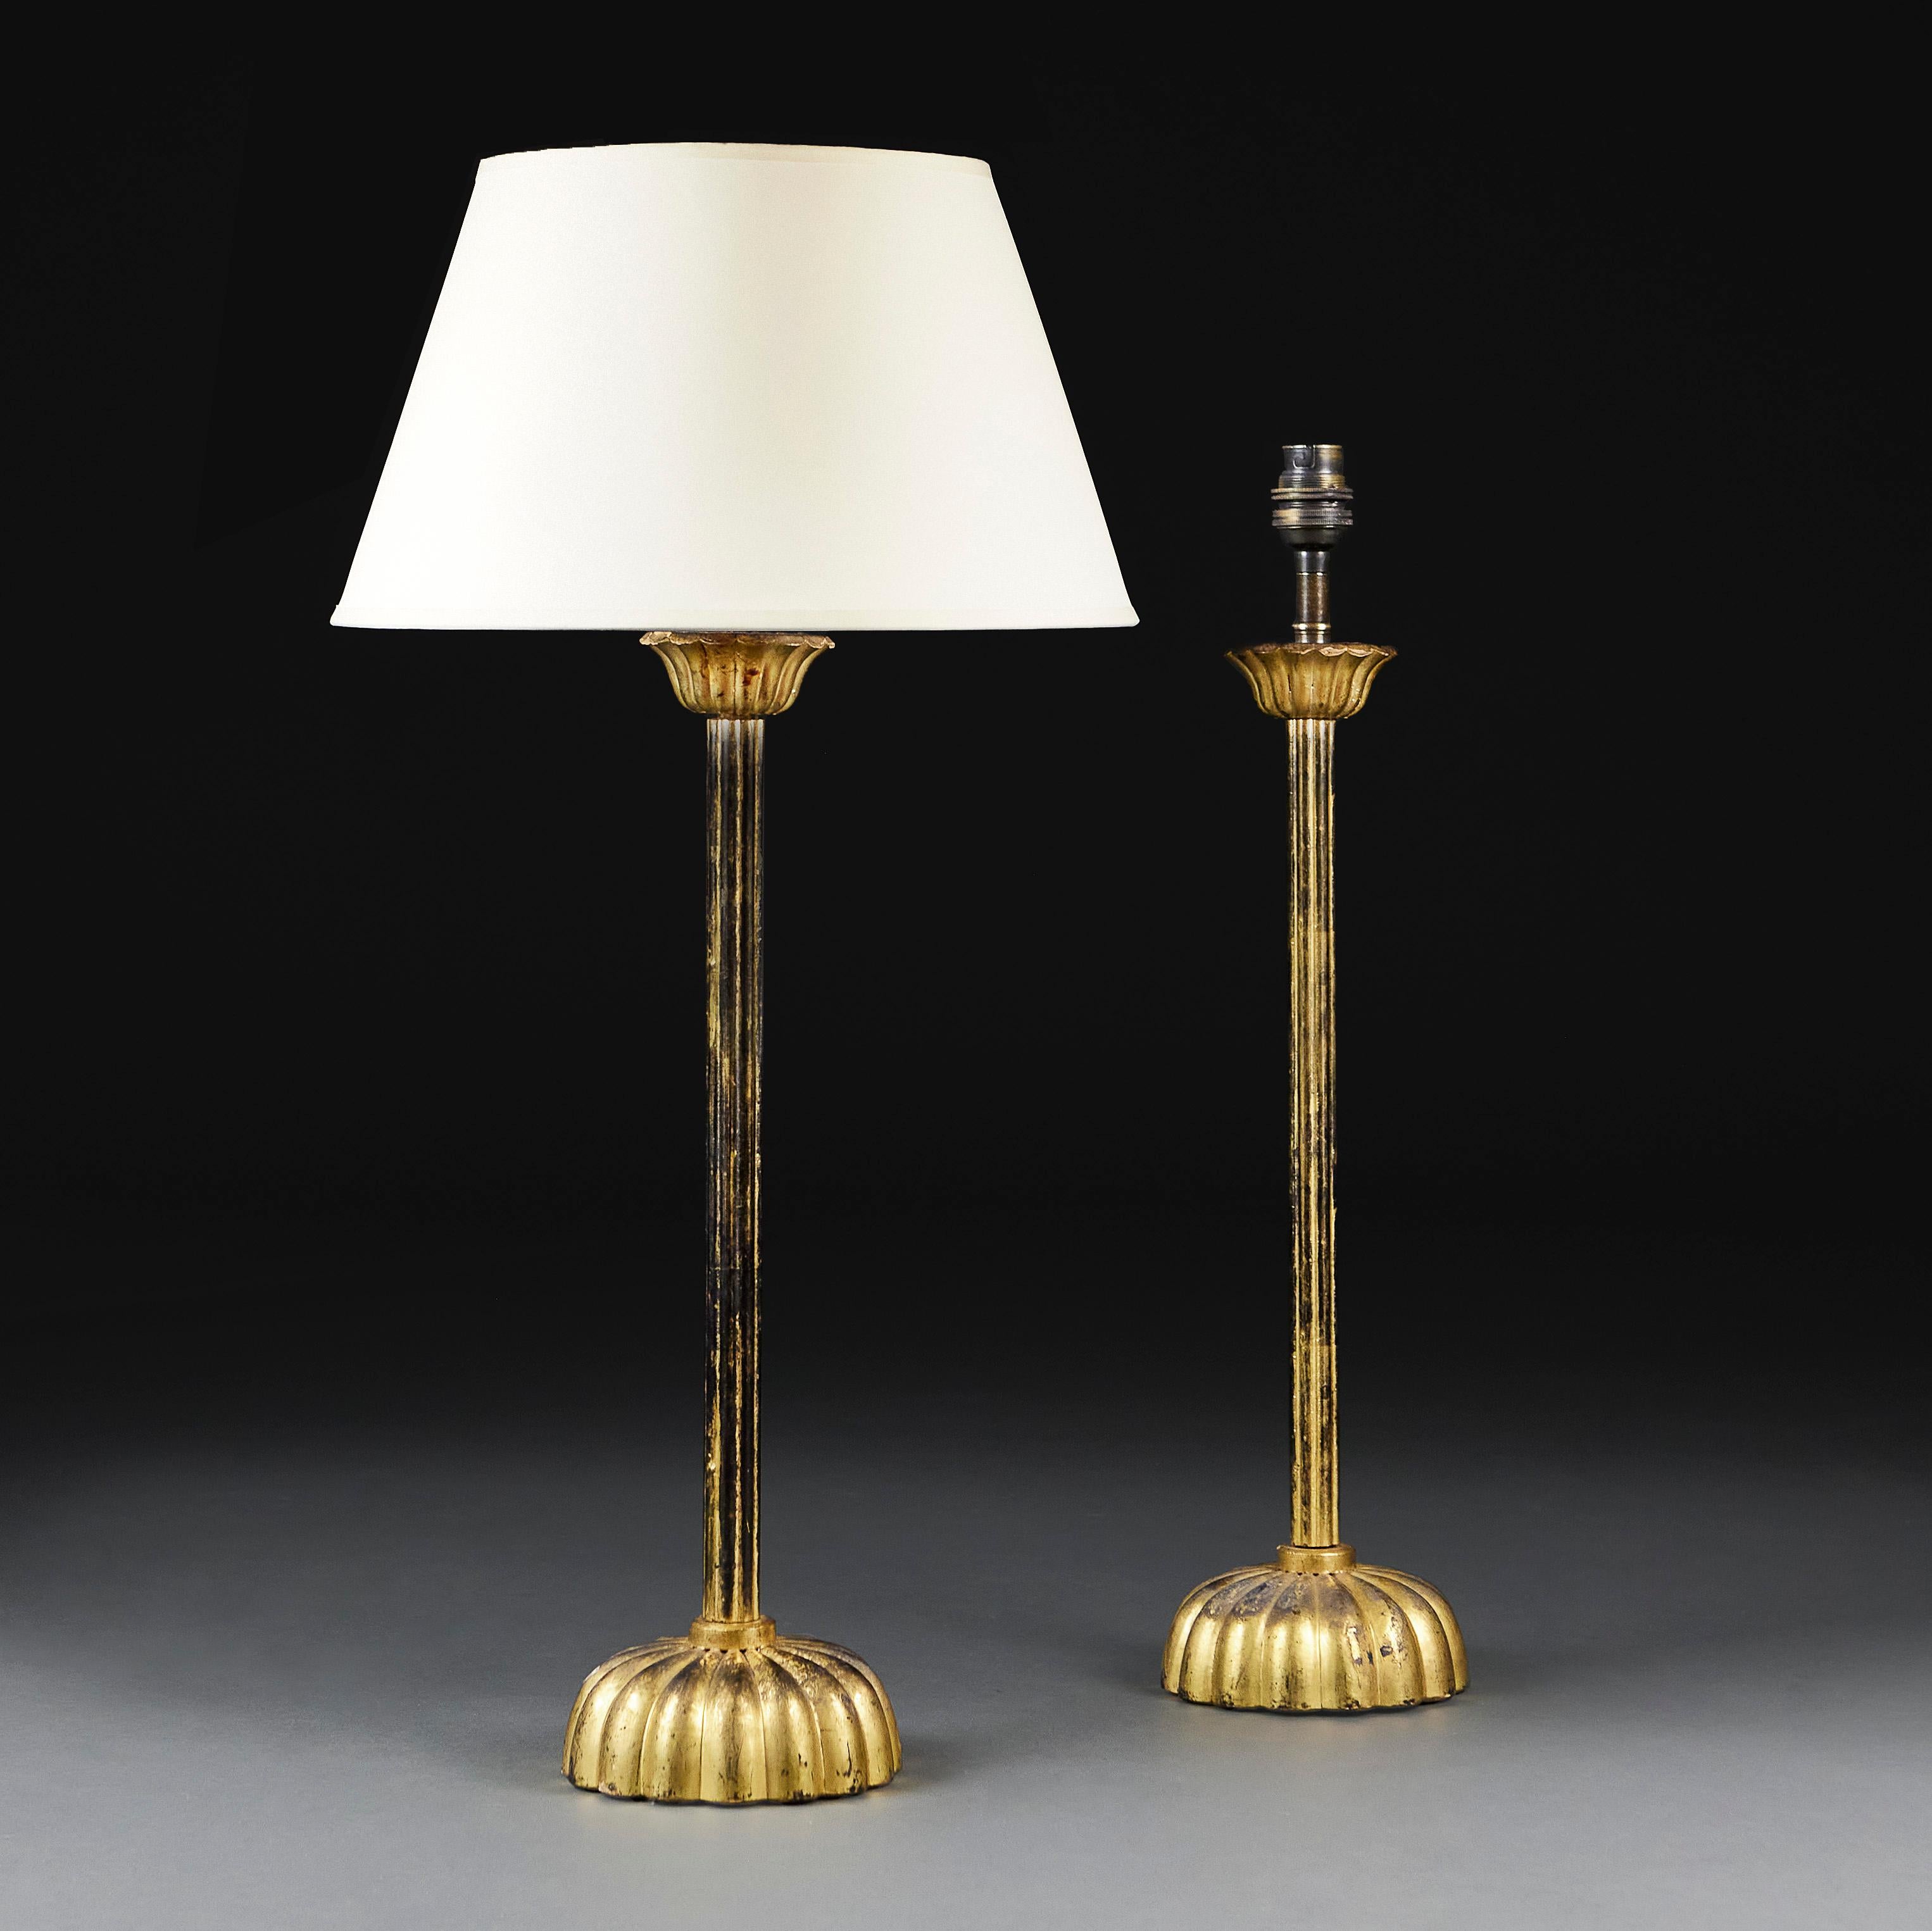 Japan, circa 1880
A fine pair of late nineteenth century gilded candlesticks with gadrooned central column, supported on a turned lotus form base, now as lamps. 

Height of column     58.00cm
Height with shade   83.00cm
Diameter of base   